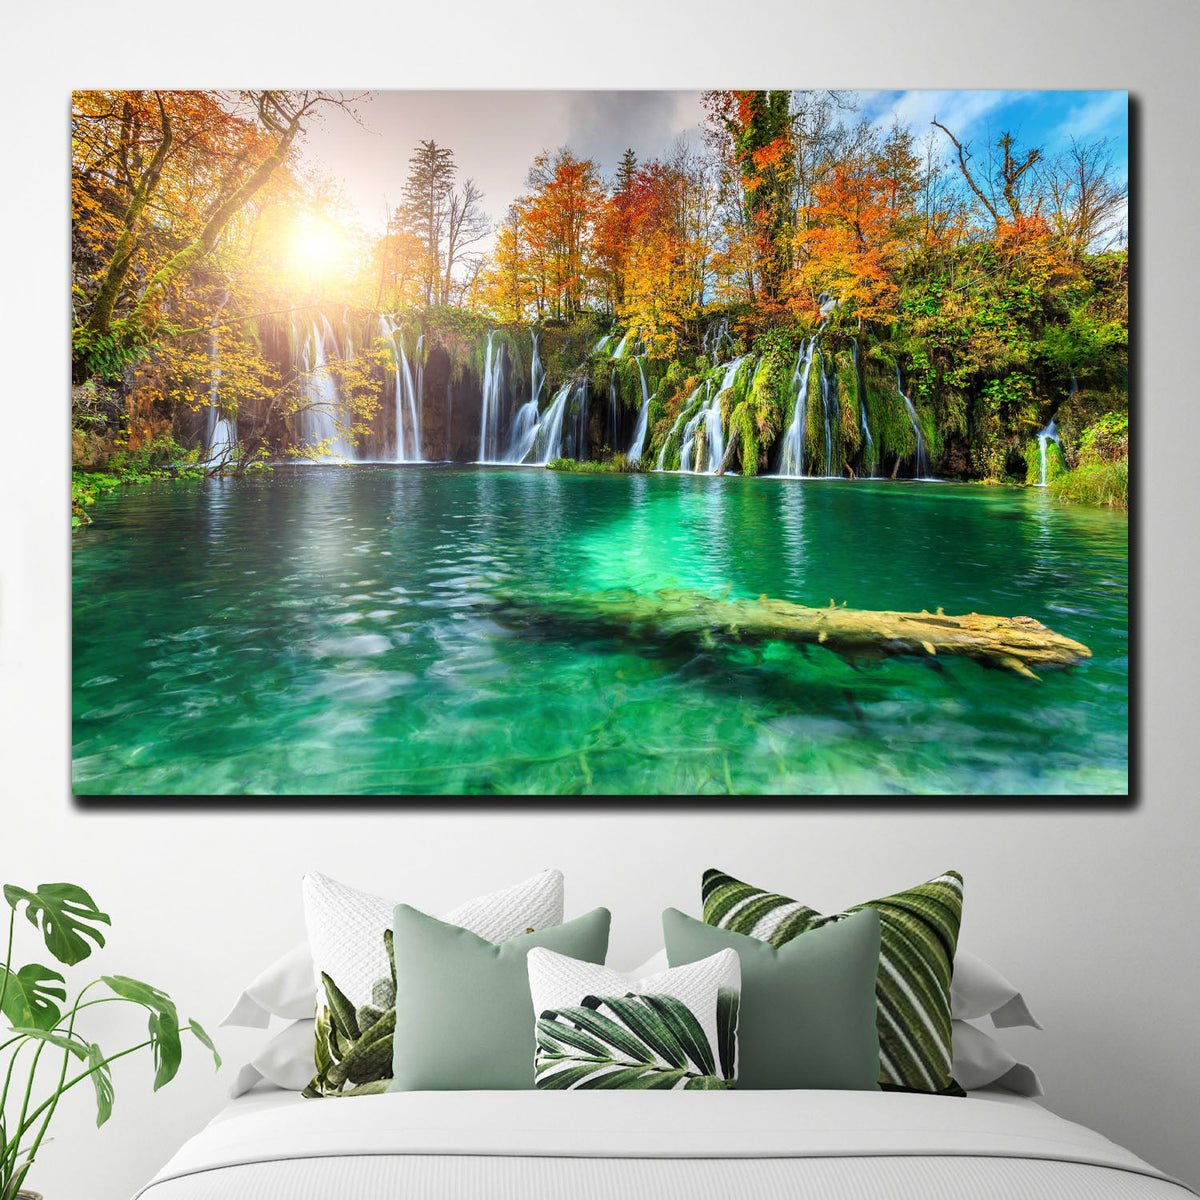 https://cdn.shopify.com/s/files/1/0387/9986/8044/products/CroatianAutumnCanvasArtprintStretched-4.jpg